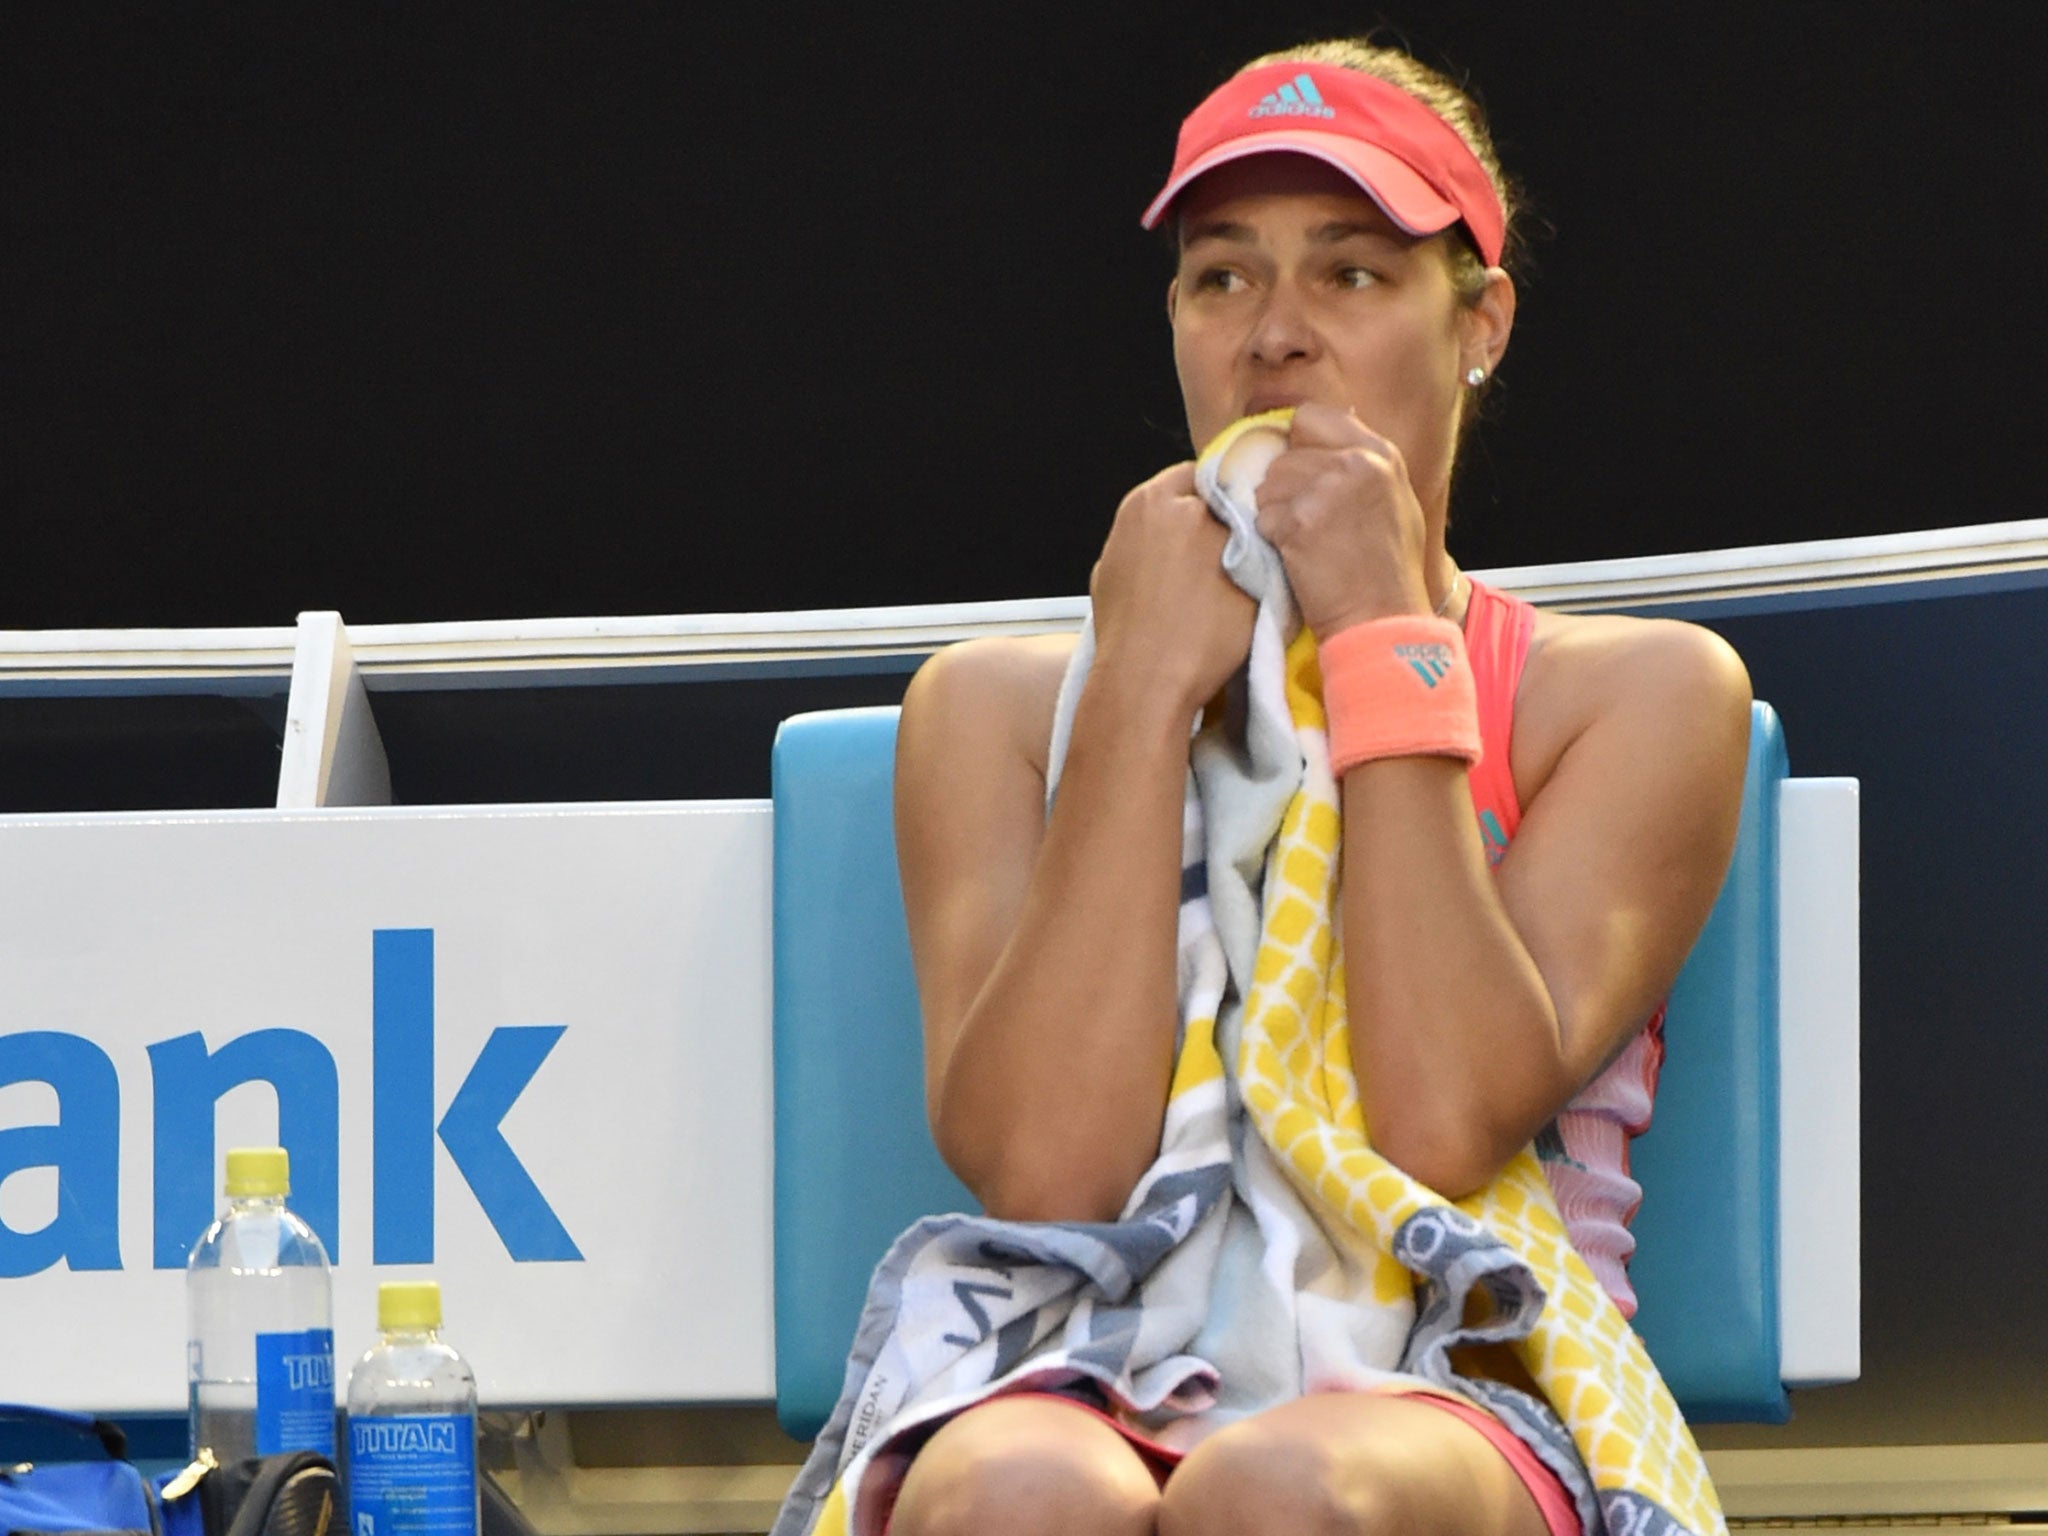 Ivanovic’s future within the sport had come under question in recent years (Getty)